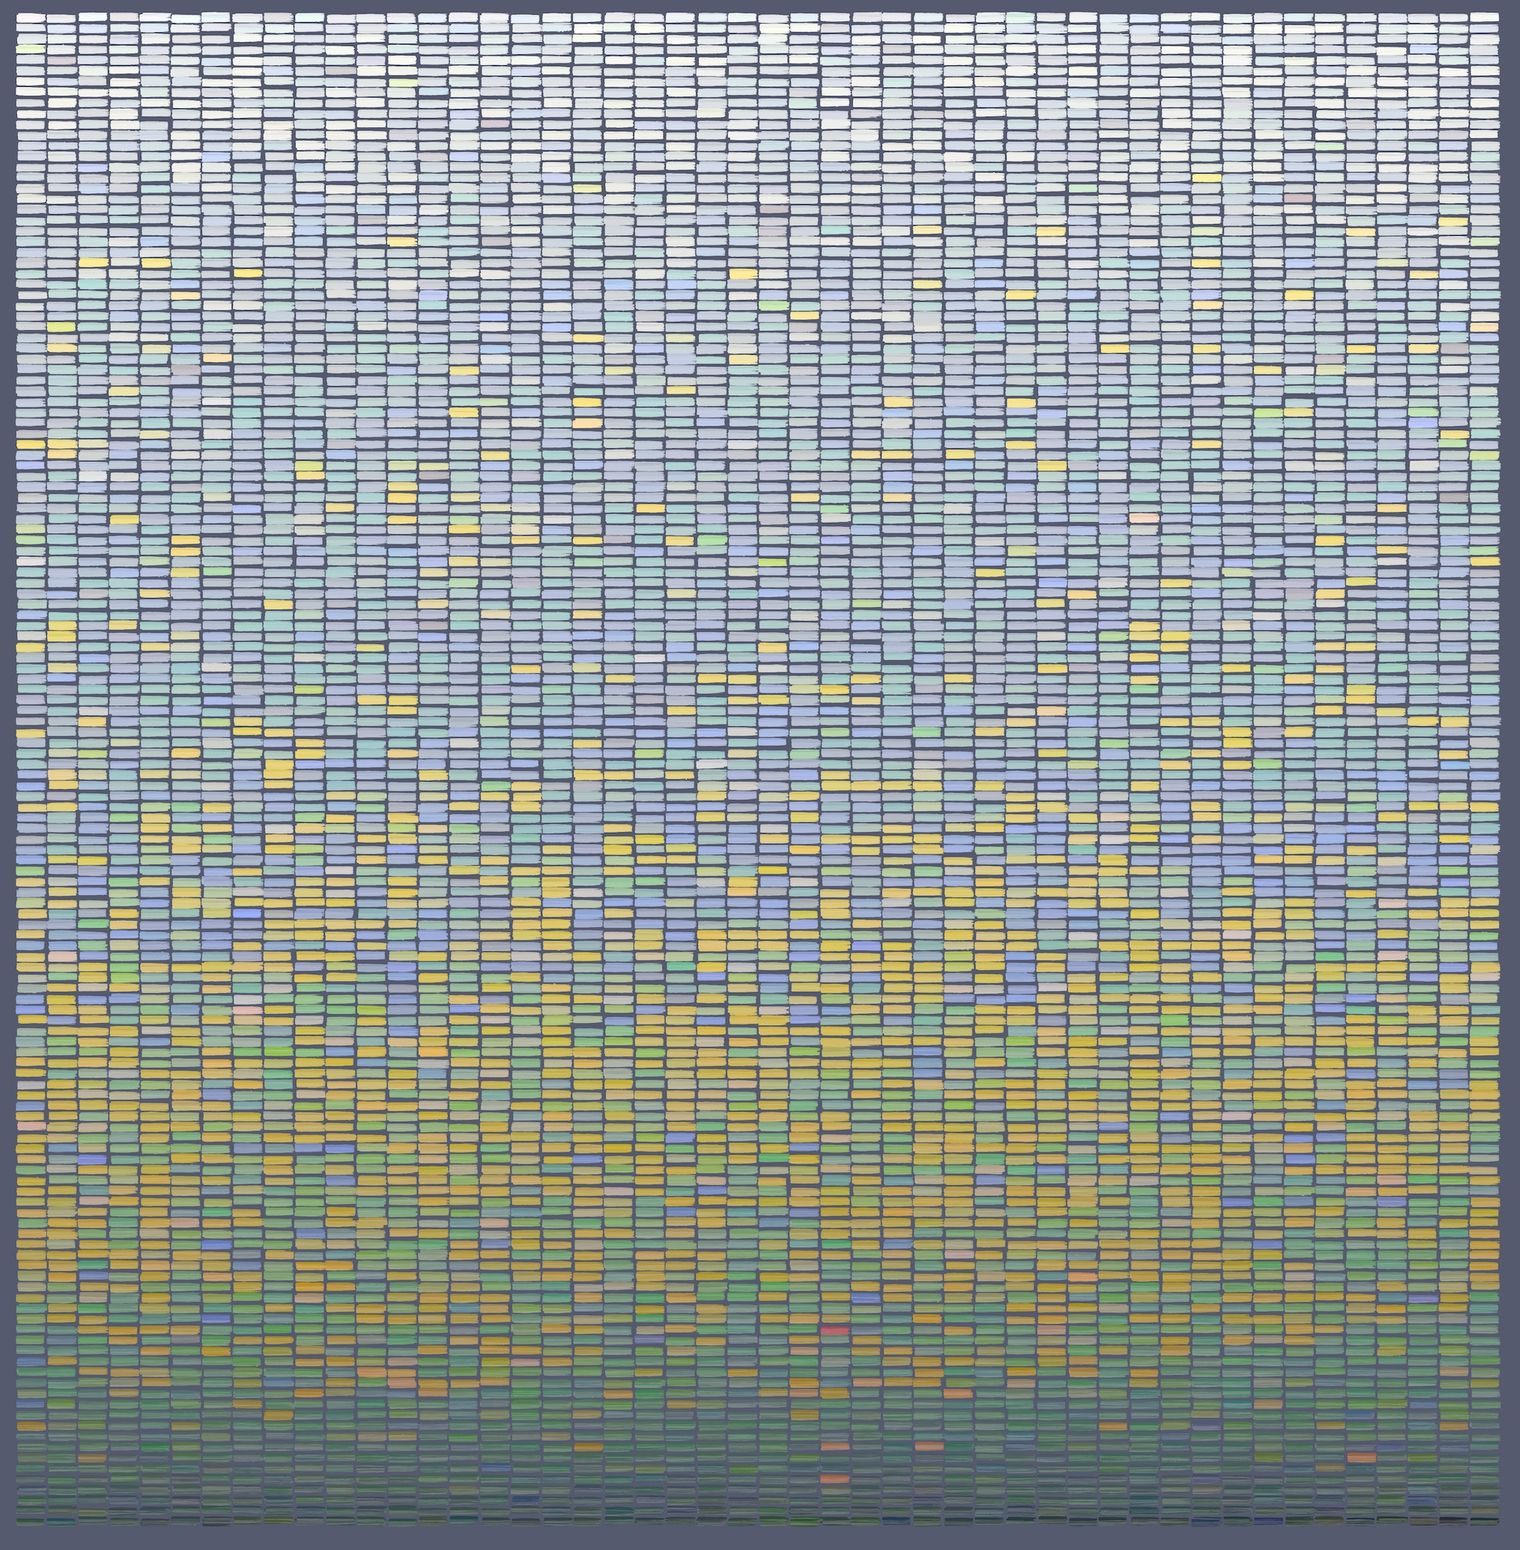 brushtrokes arranged in a grid in descending brightness, from white to pale blue and teal, to light yellow, green and dark blue